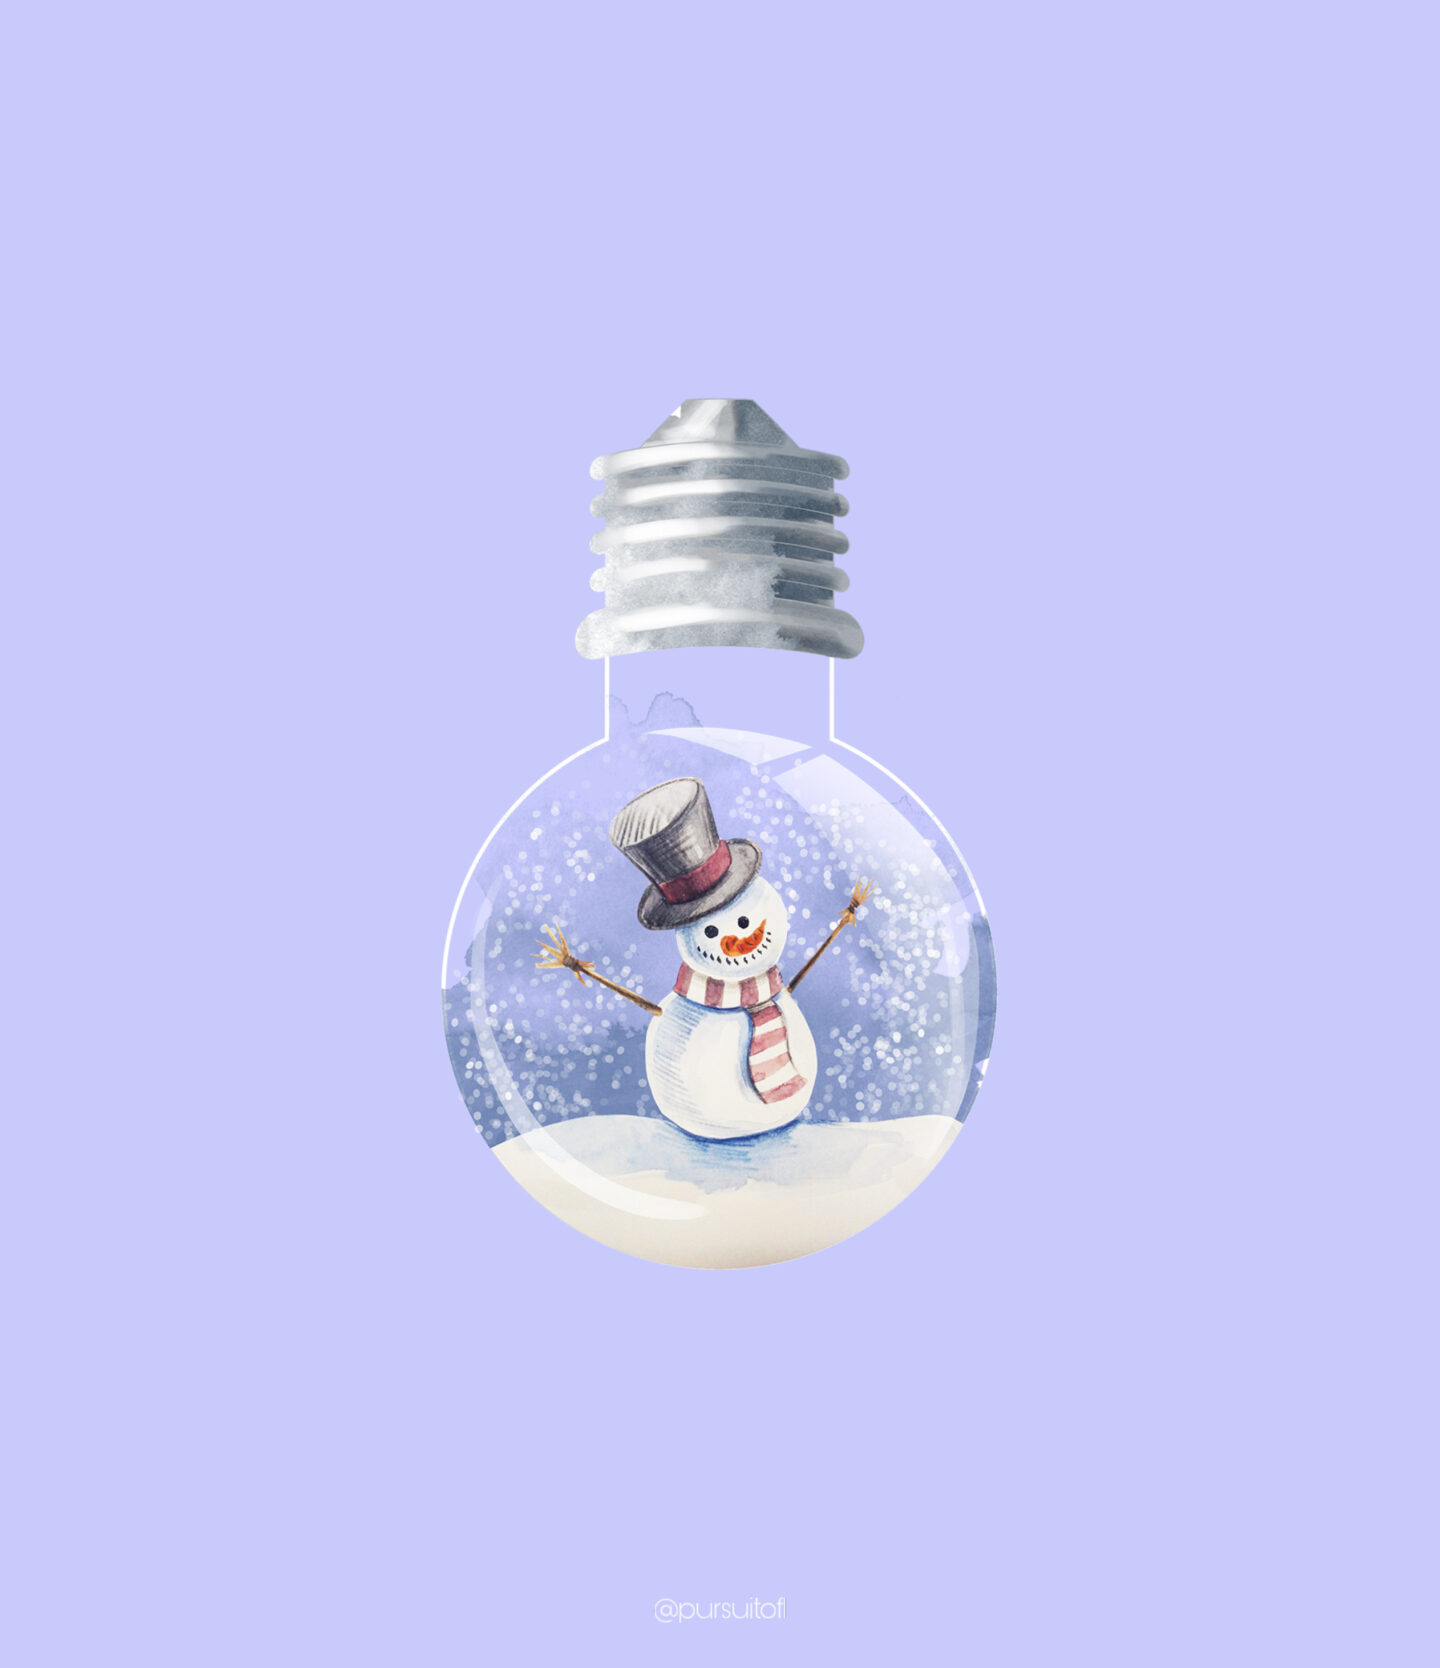 Periwinkle tablet wallpaper with snowman and falling snow inside of a lightbulb